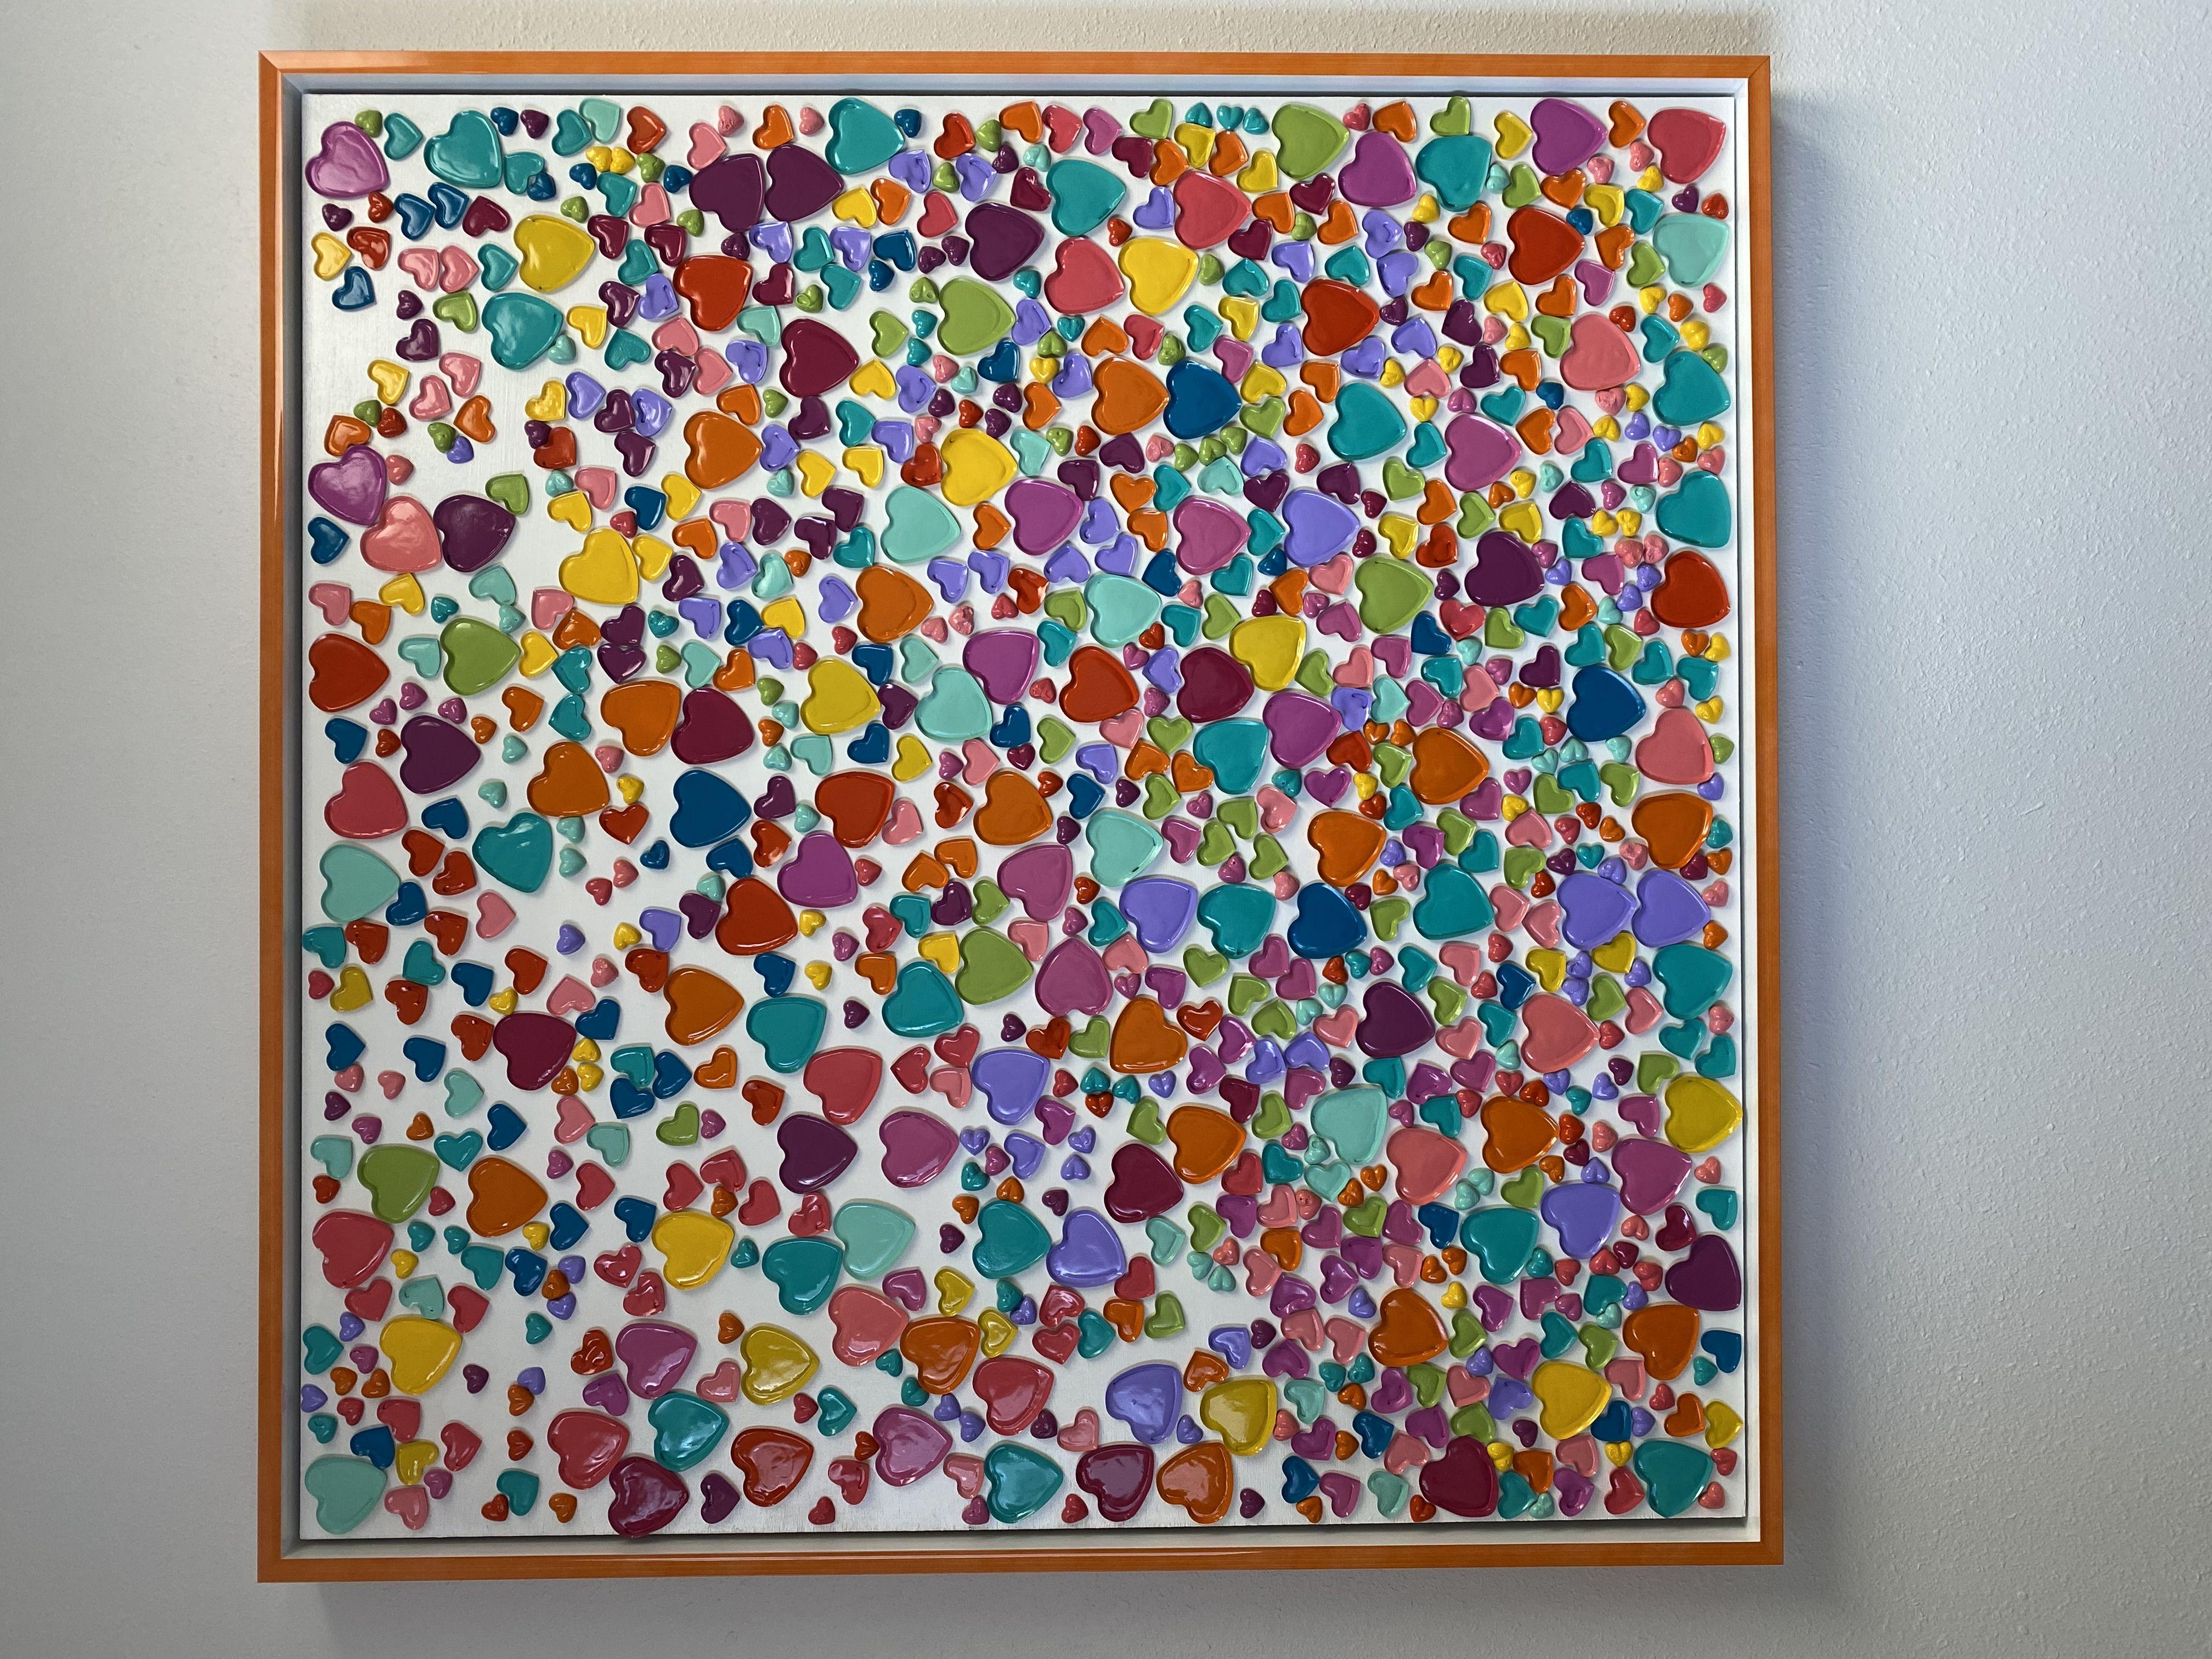 This mixed media piece is 48x48x.25 without the frame.  This piece is framed with an orange lacquer frame.  With frame the dimensions are 50x50x2 approx.  Weighs 45lbs.  These are handmade 3D hearts that are adhered to a gessoed and painted board. 